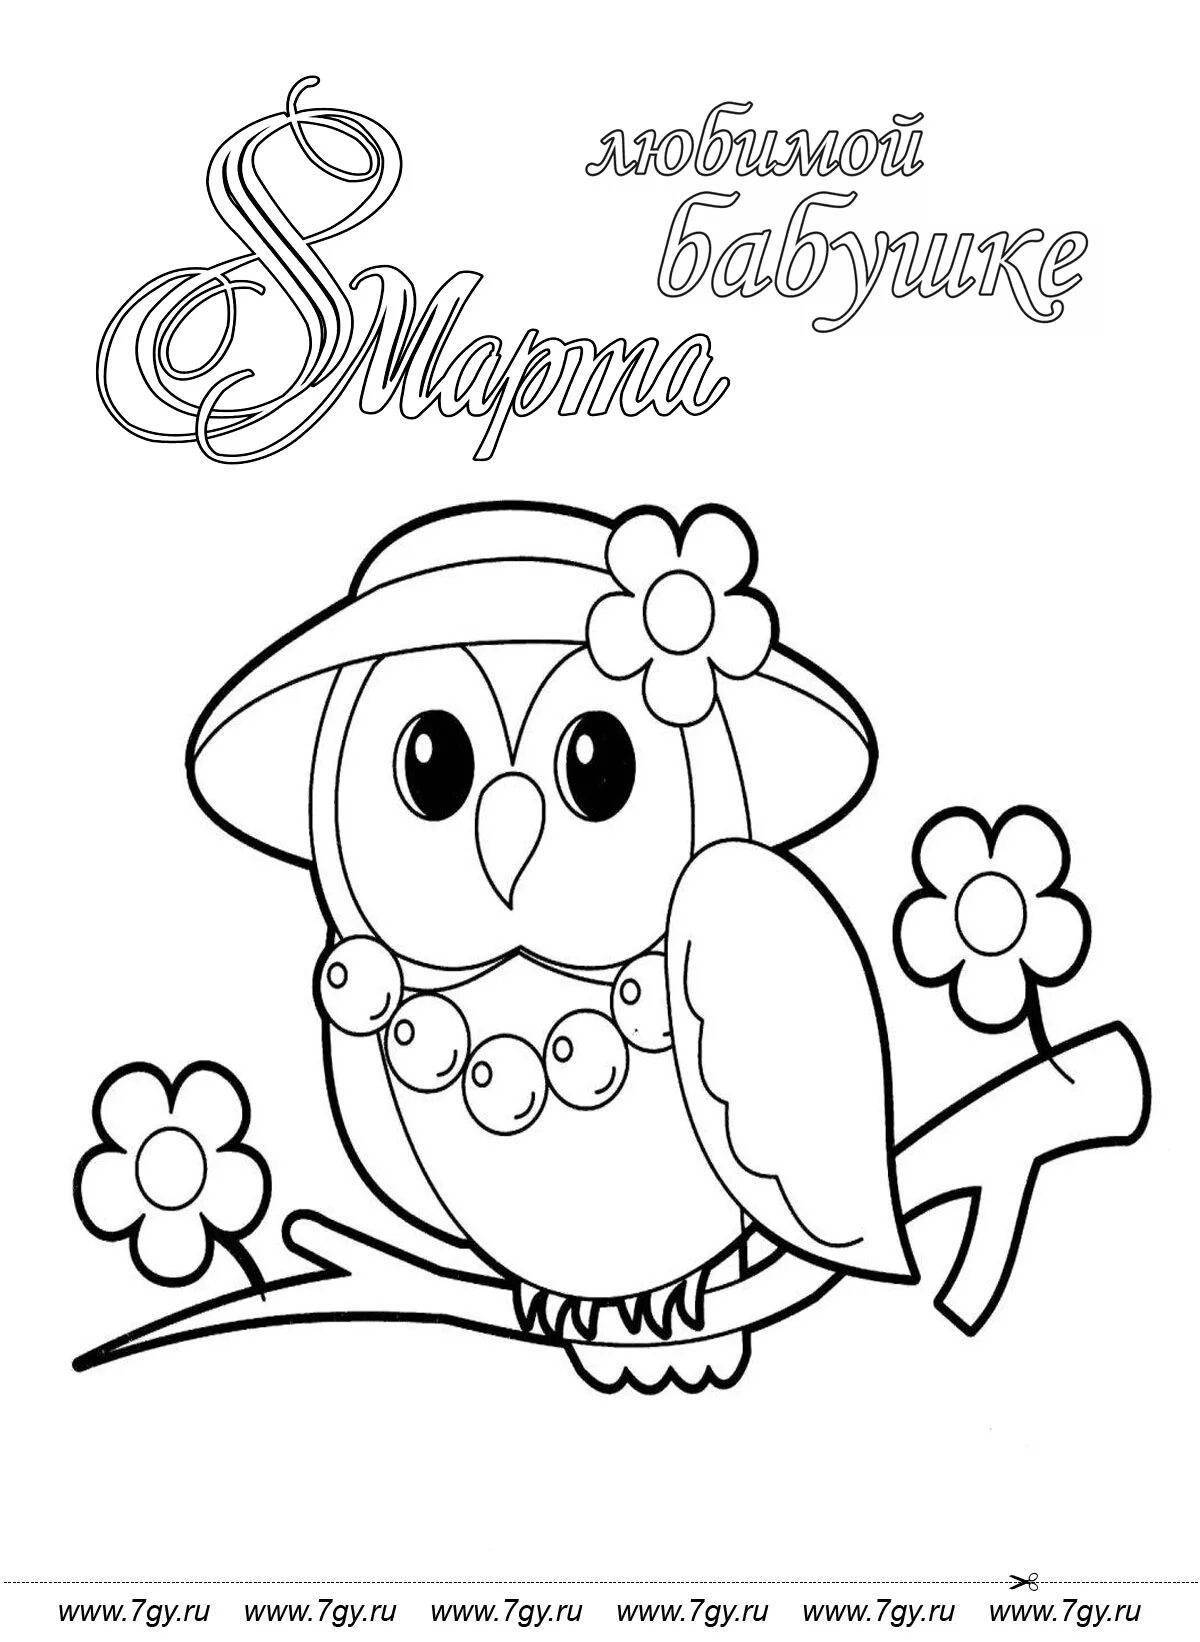 Adorable March 8 coloring book for kids